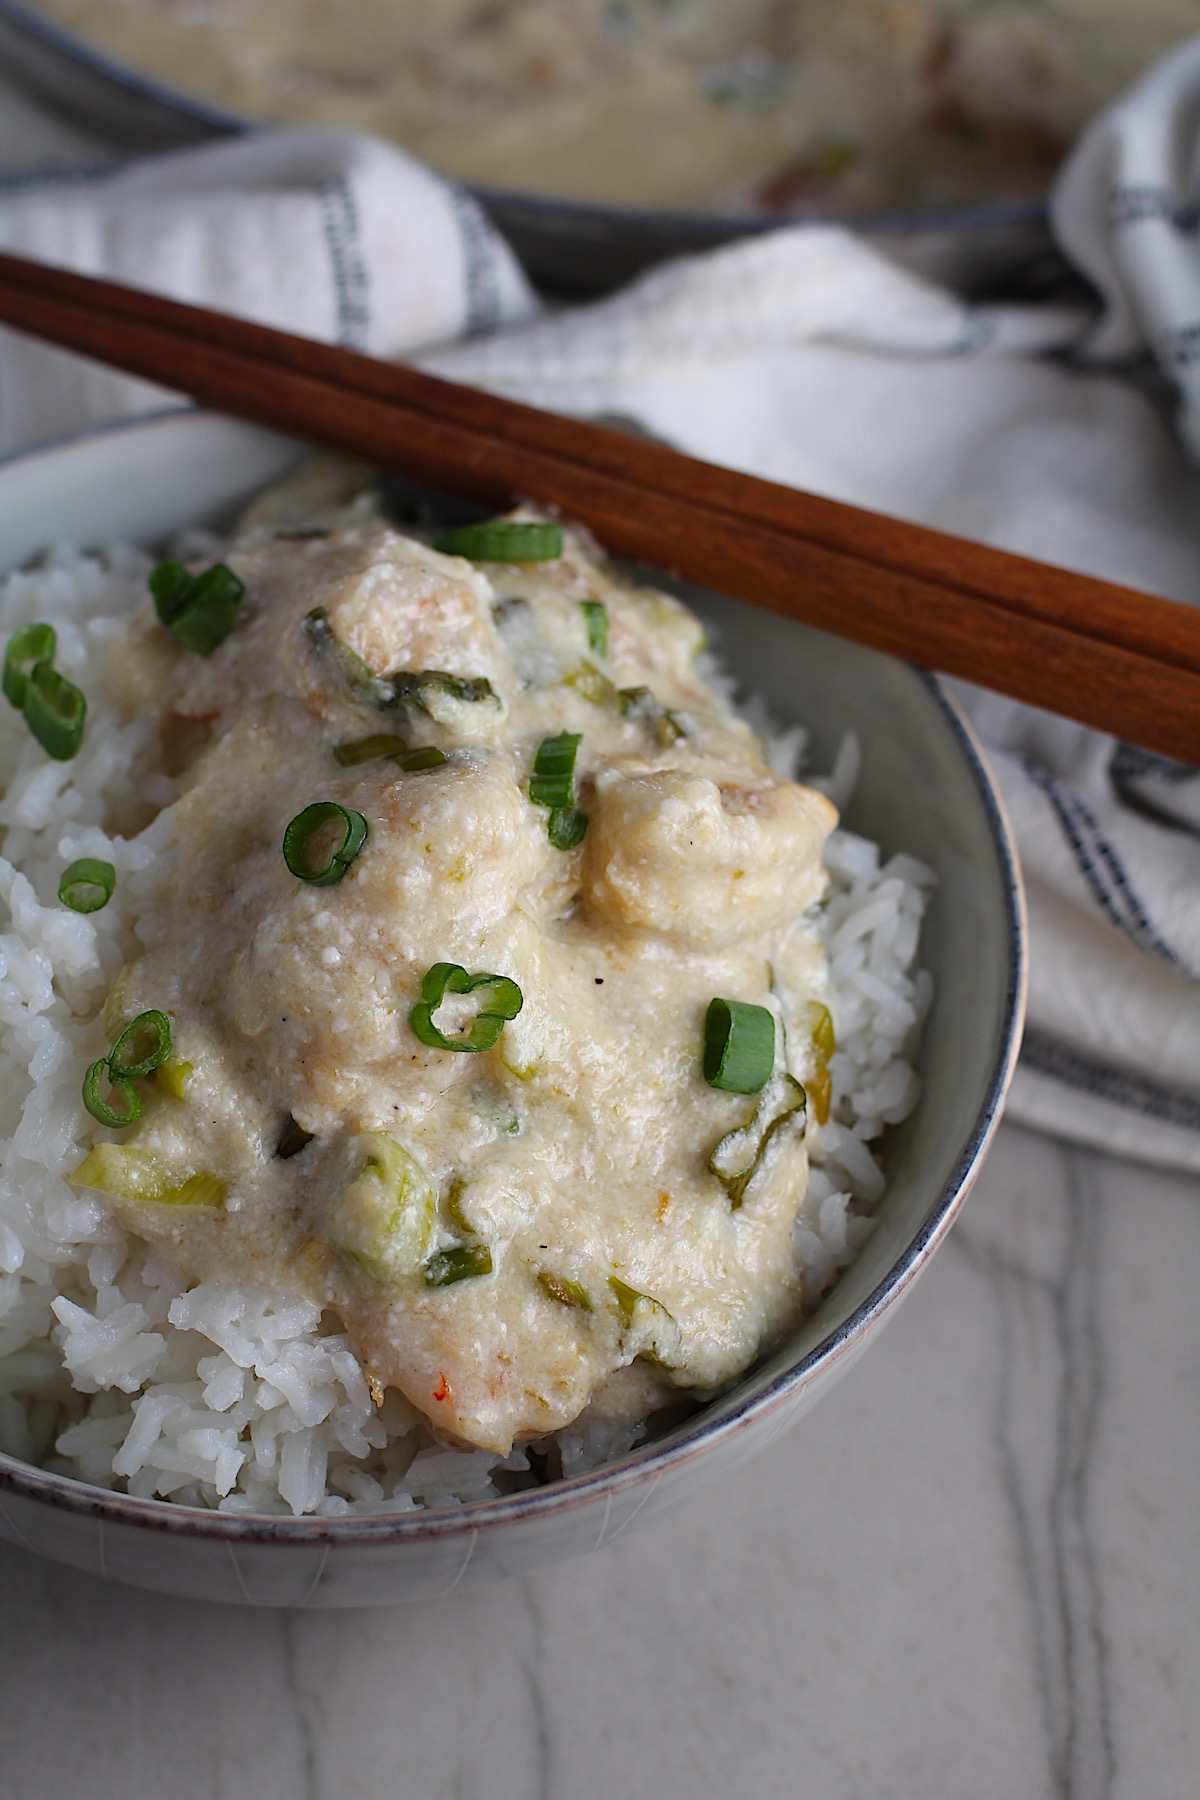 Creamy Chinese Coconut Shrimp Recipe over rice in bowl garnished with scallions and chopsticks on edge of bowl. It's filled with flavor from garlic, ginger, coconut, and more. Done in under 30 minutes, it's perfect for busy nights!